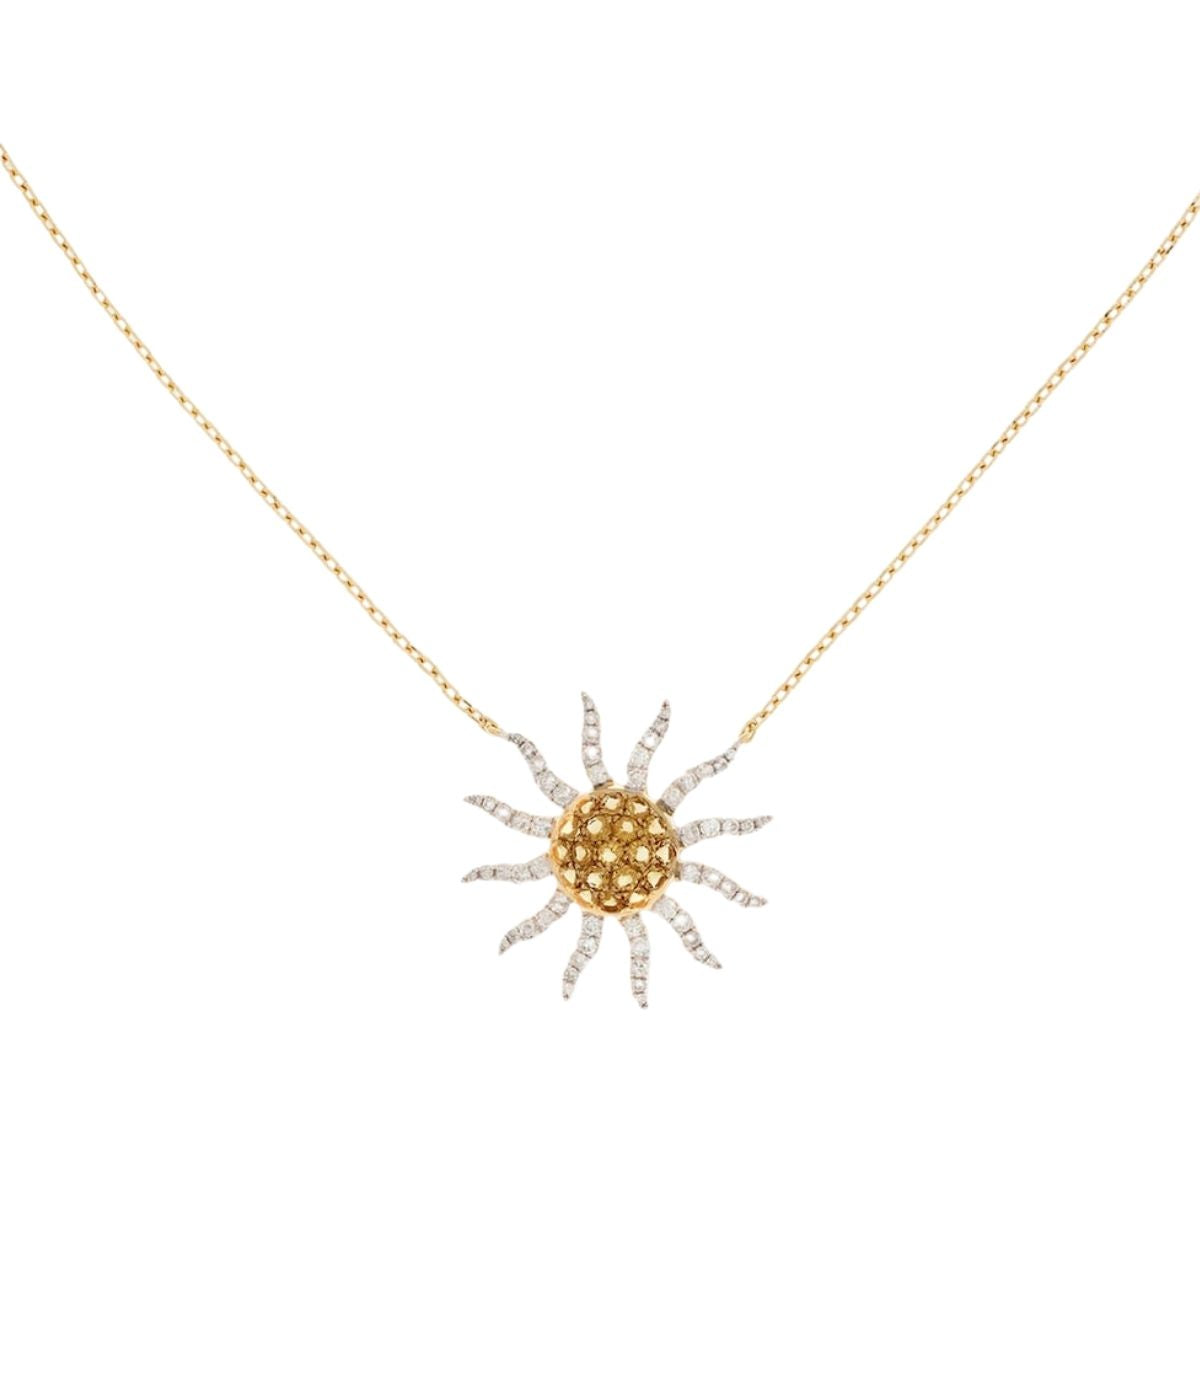 Soleil 18k yellow gold, diamond and citrine necklace